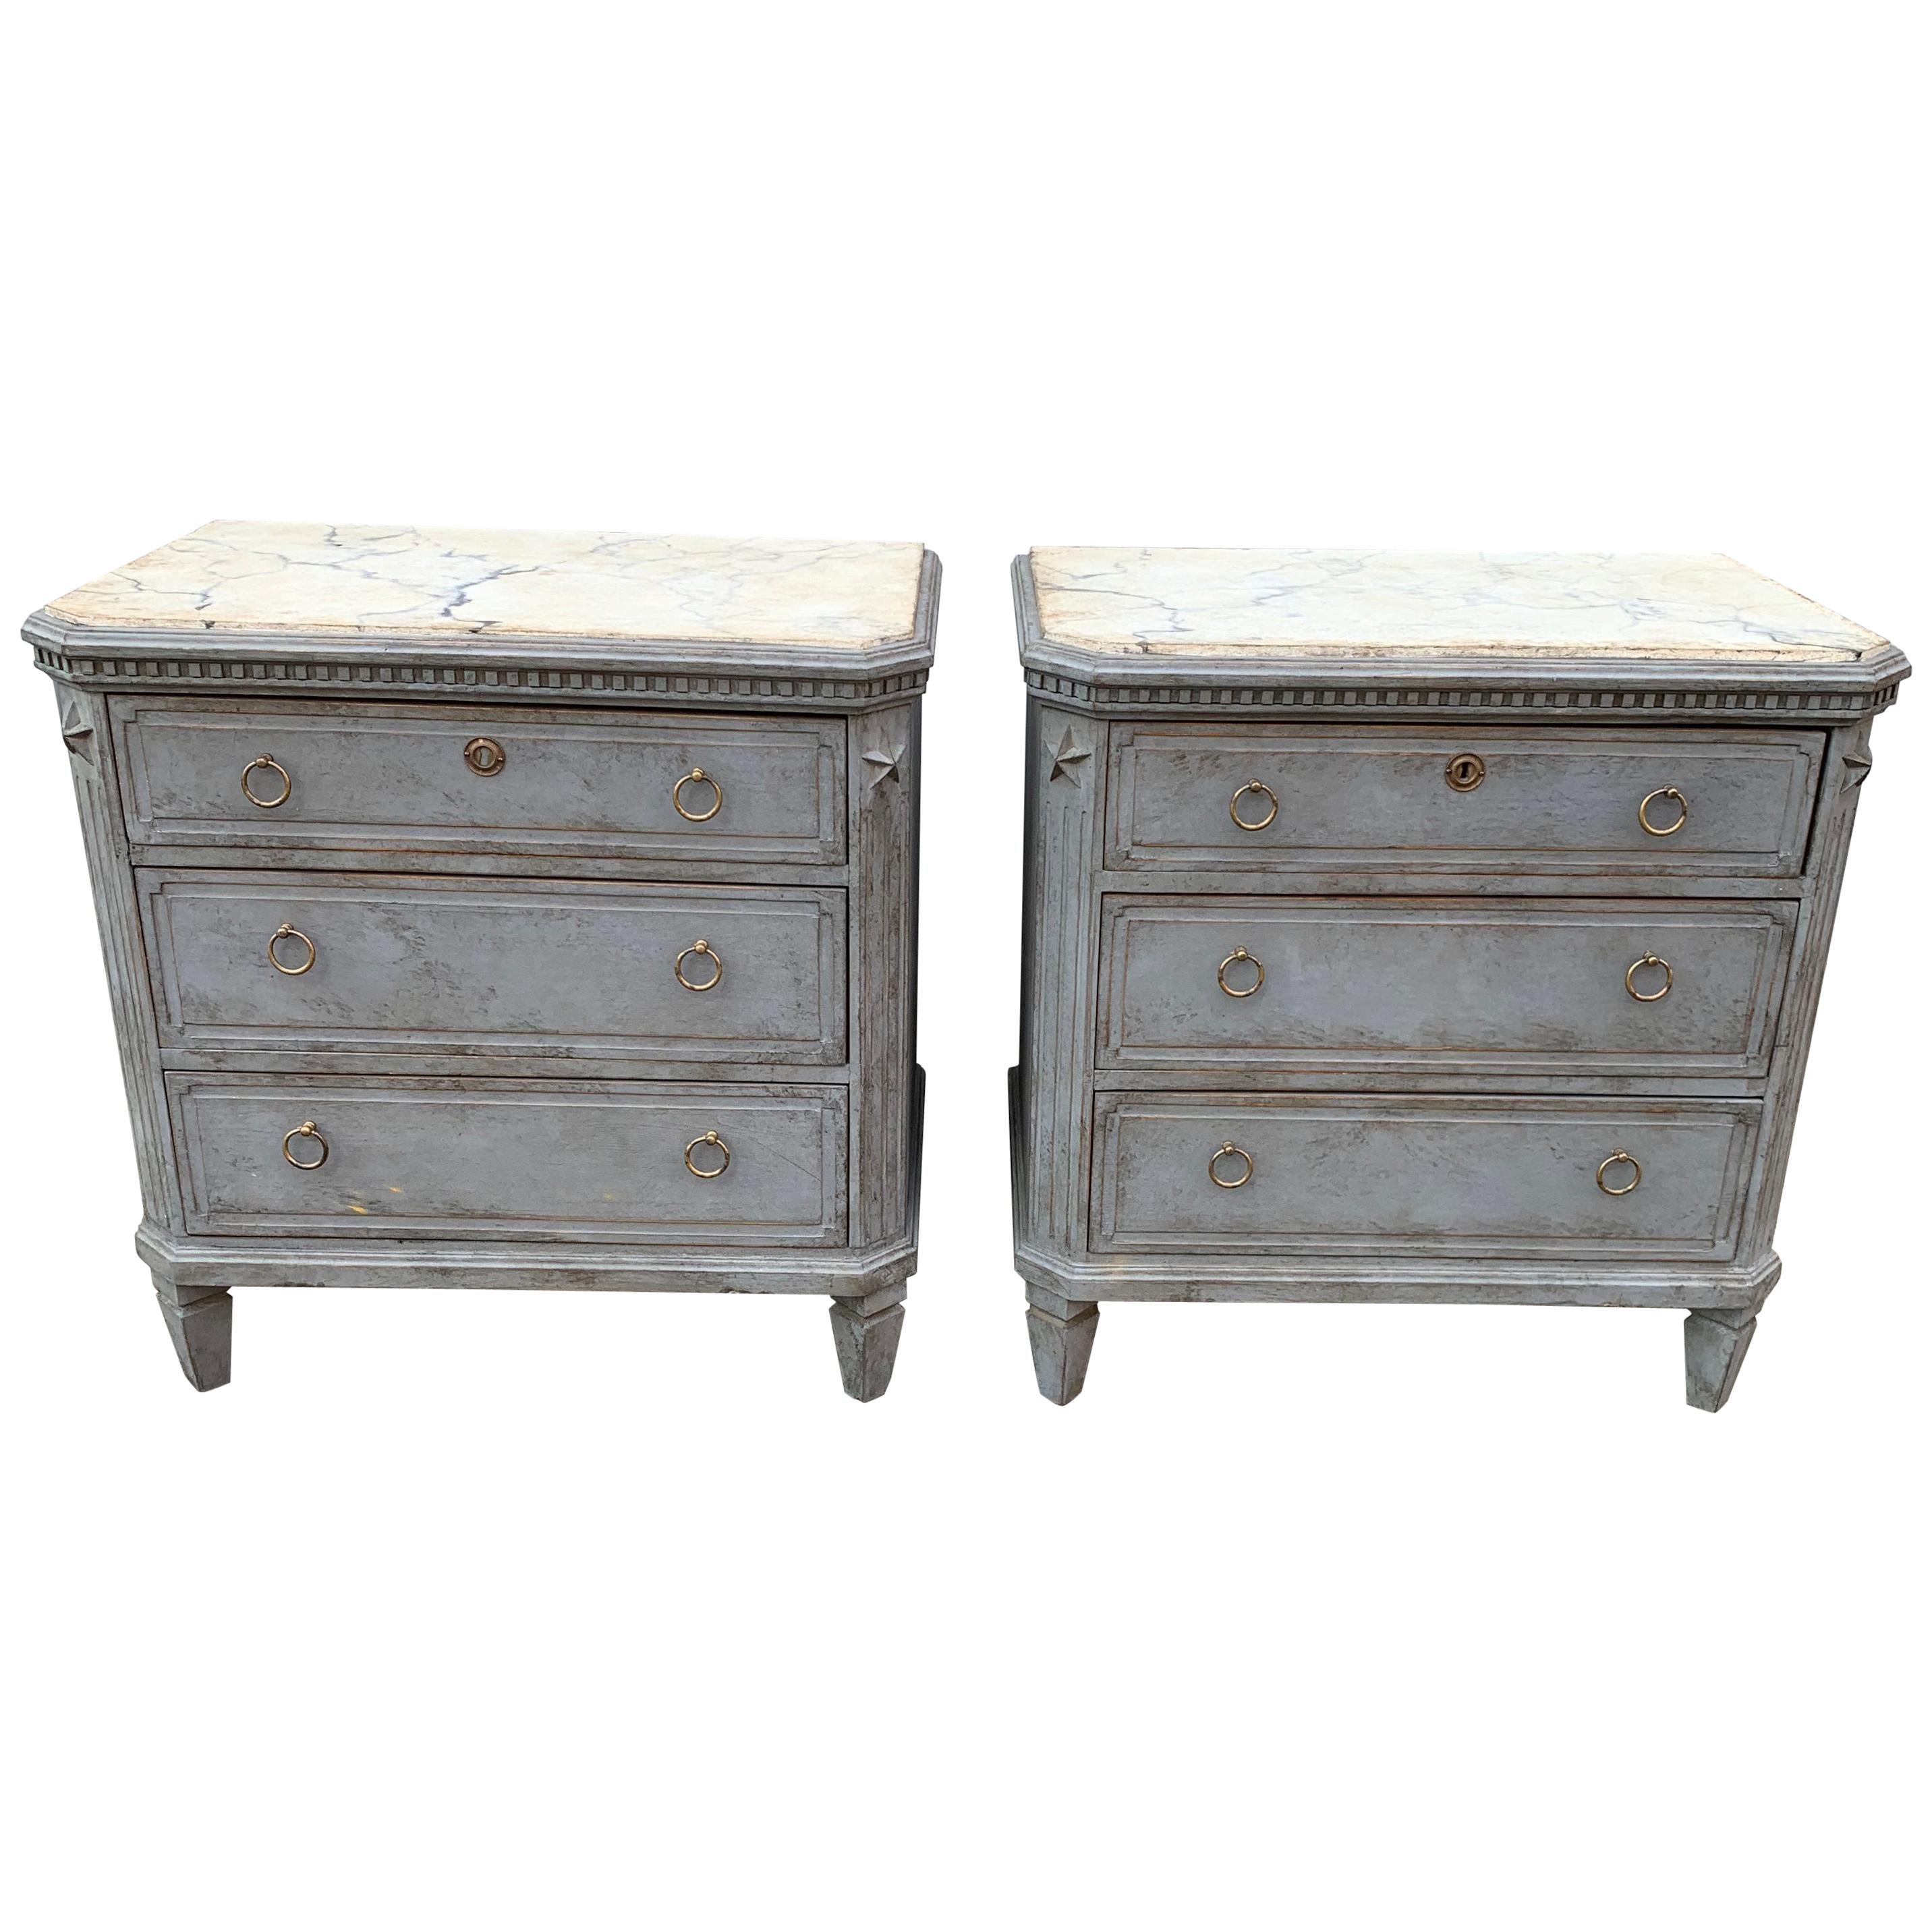 Swedish Pair of Painted Faux Marble Top Gustavian Style Dressers